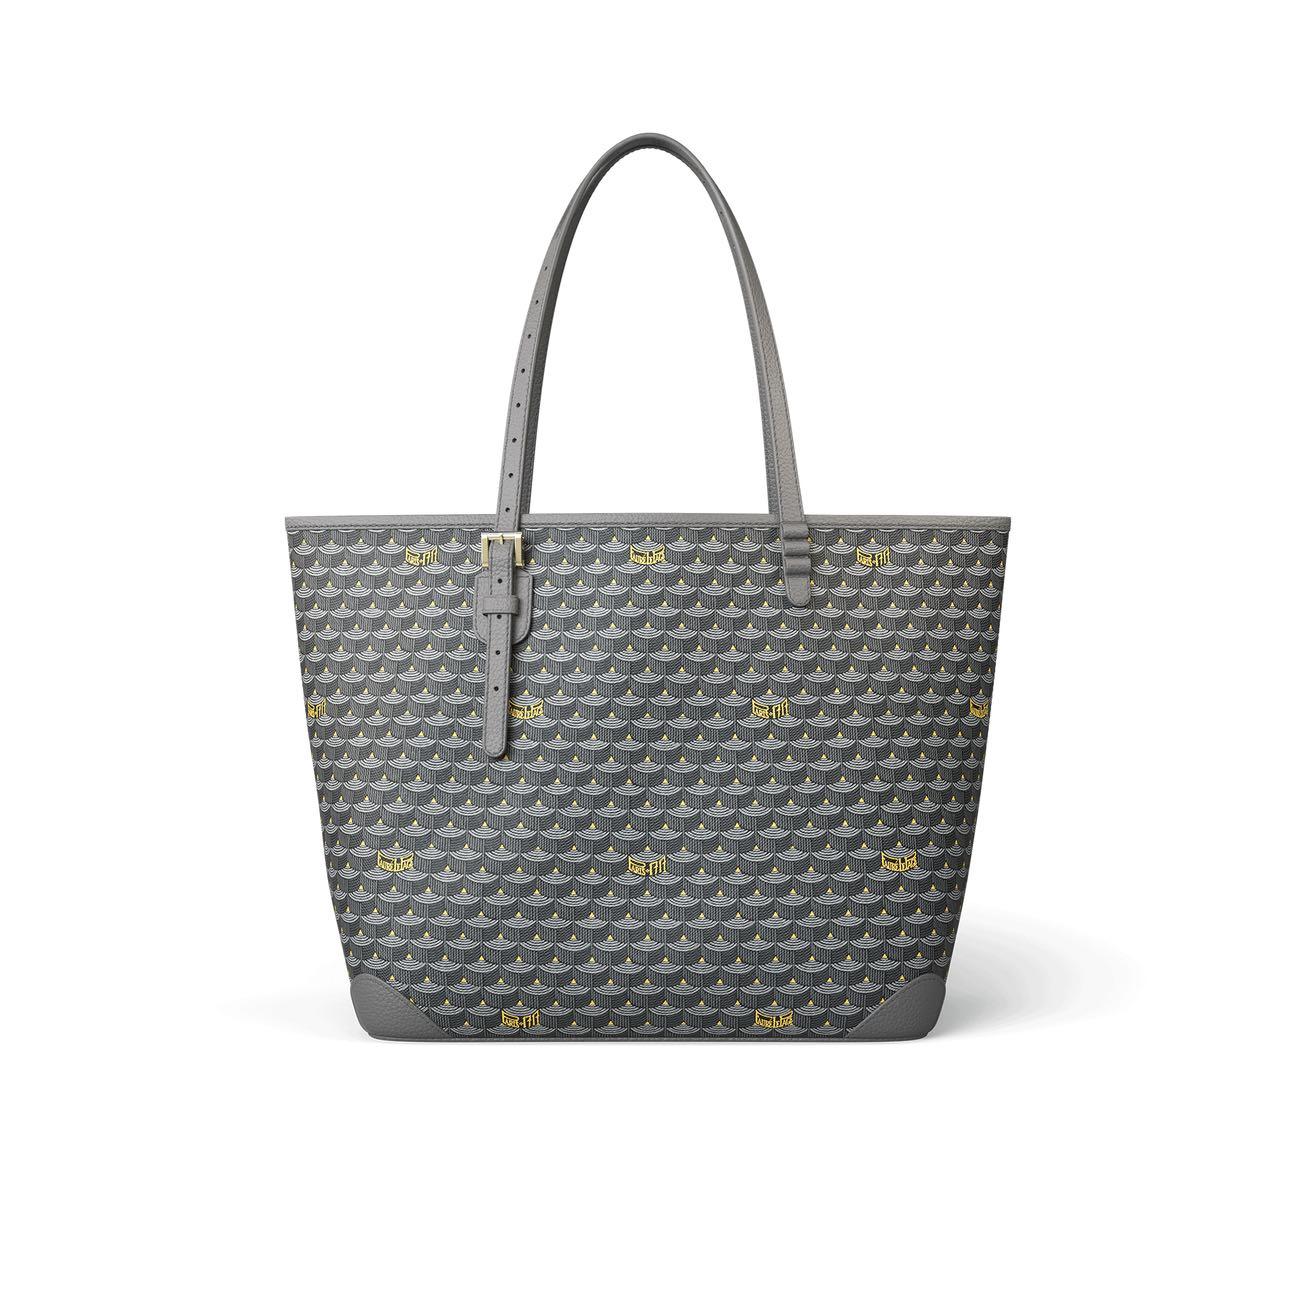 Faure le Page Daily Battle 32 in Steel Grey Canvas, Women's Fashion, Bags &  Wallets, Tote Bags on Carousell